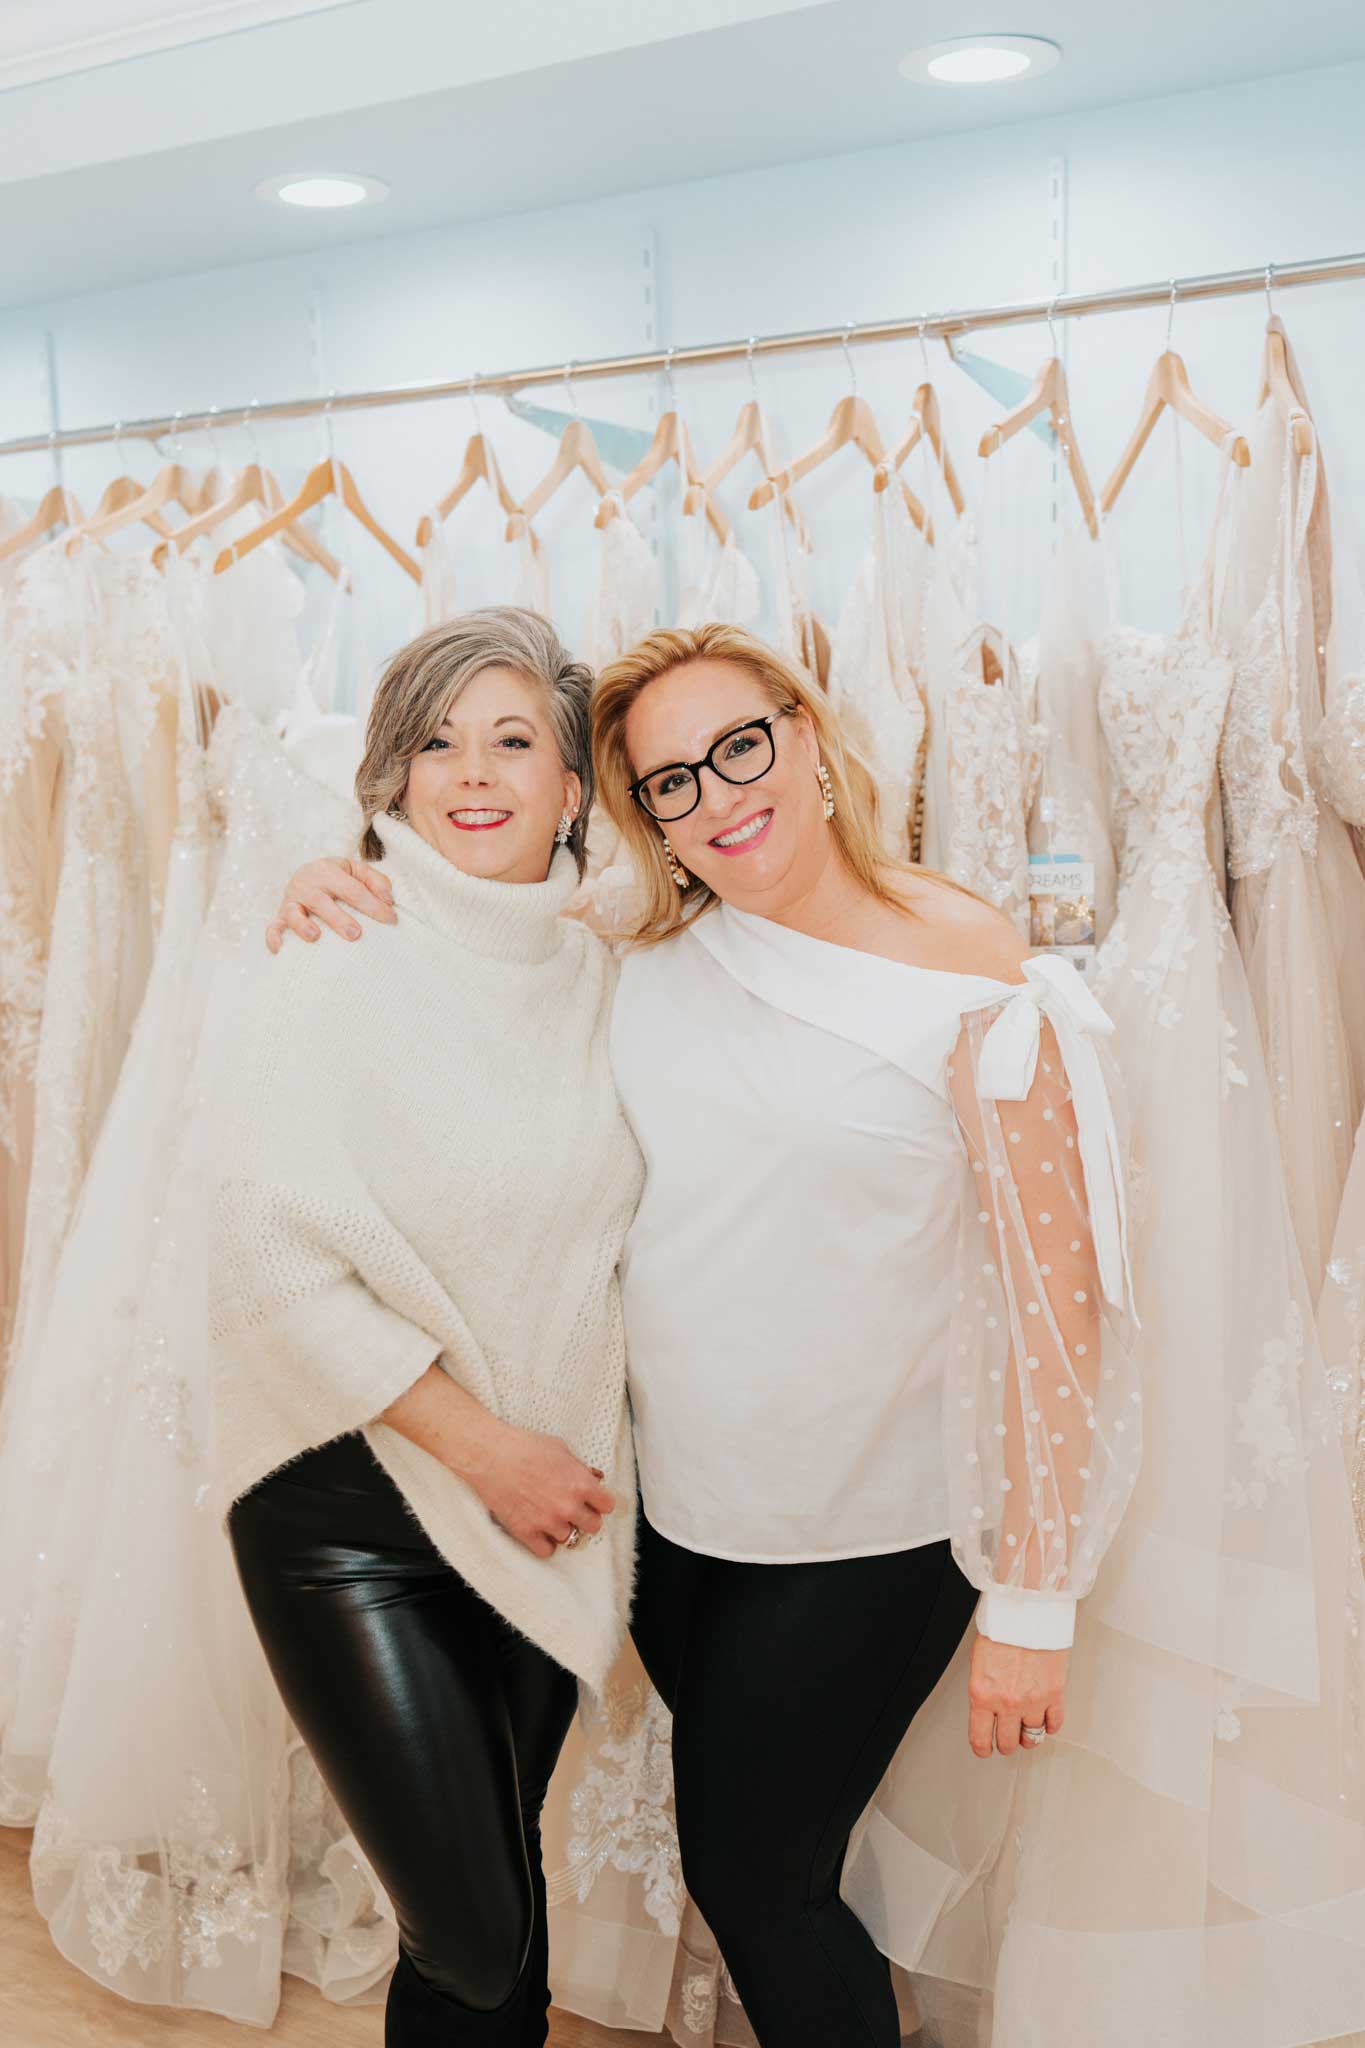 Two women posing for a photo in a bridal shop, surrounded by wedding dresses.